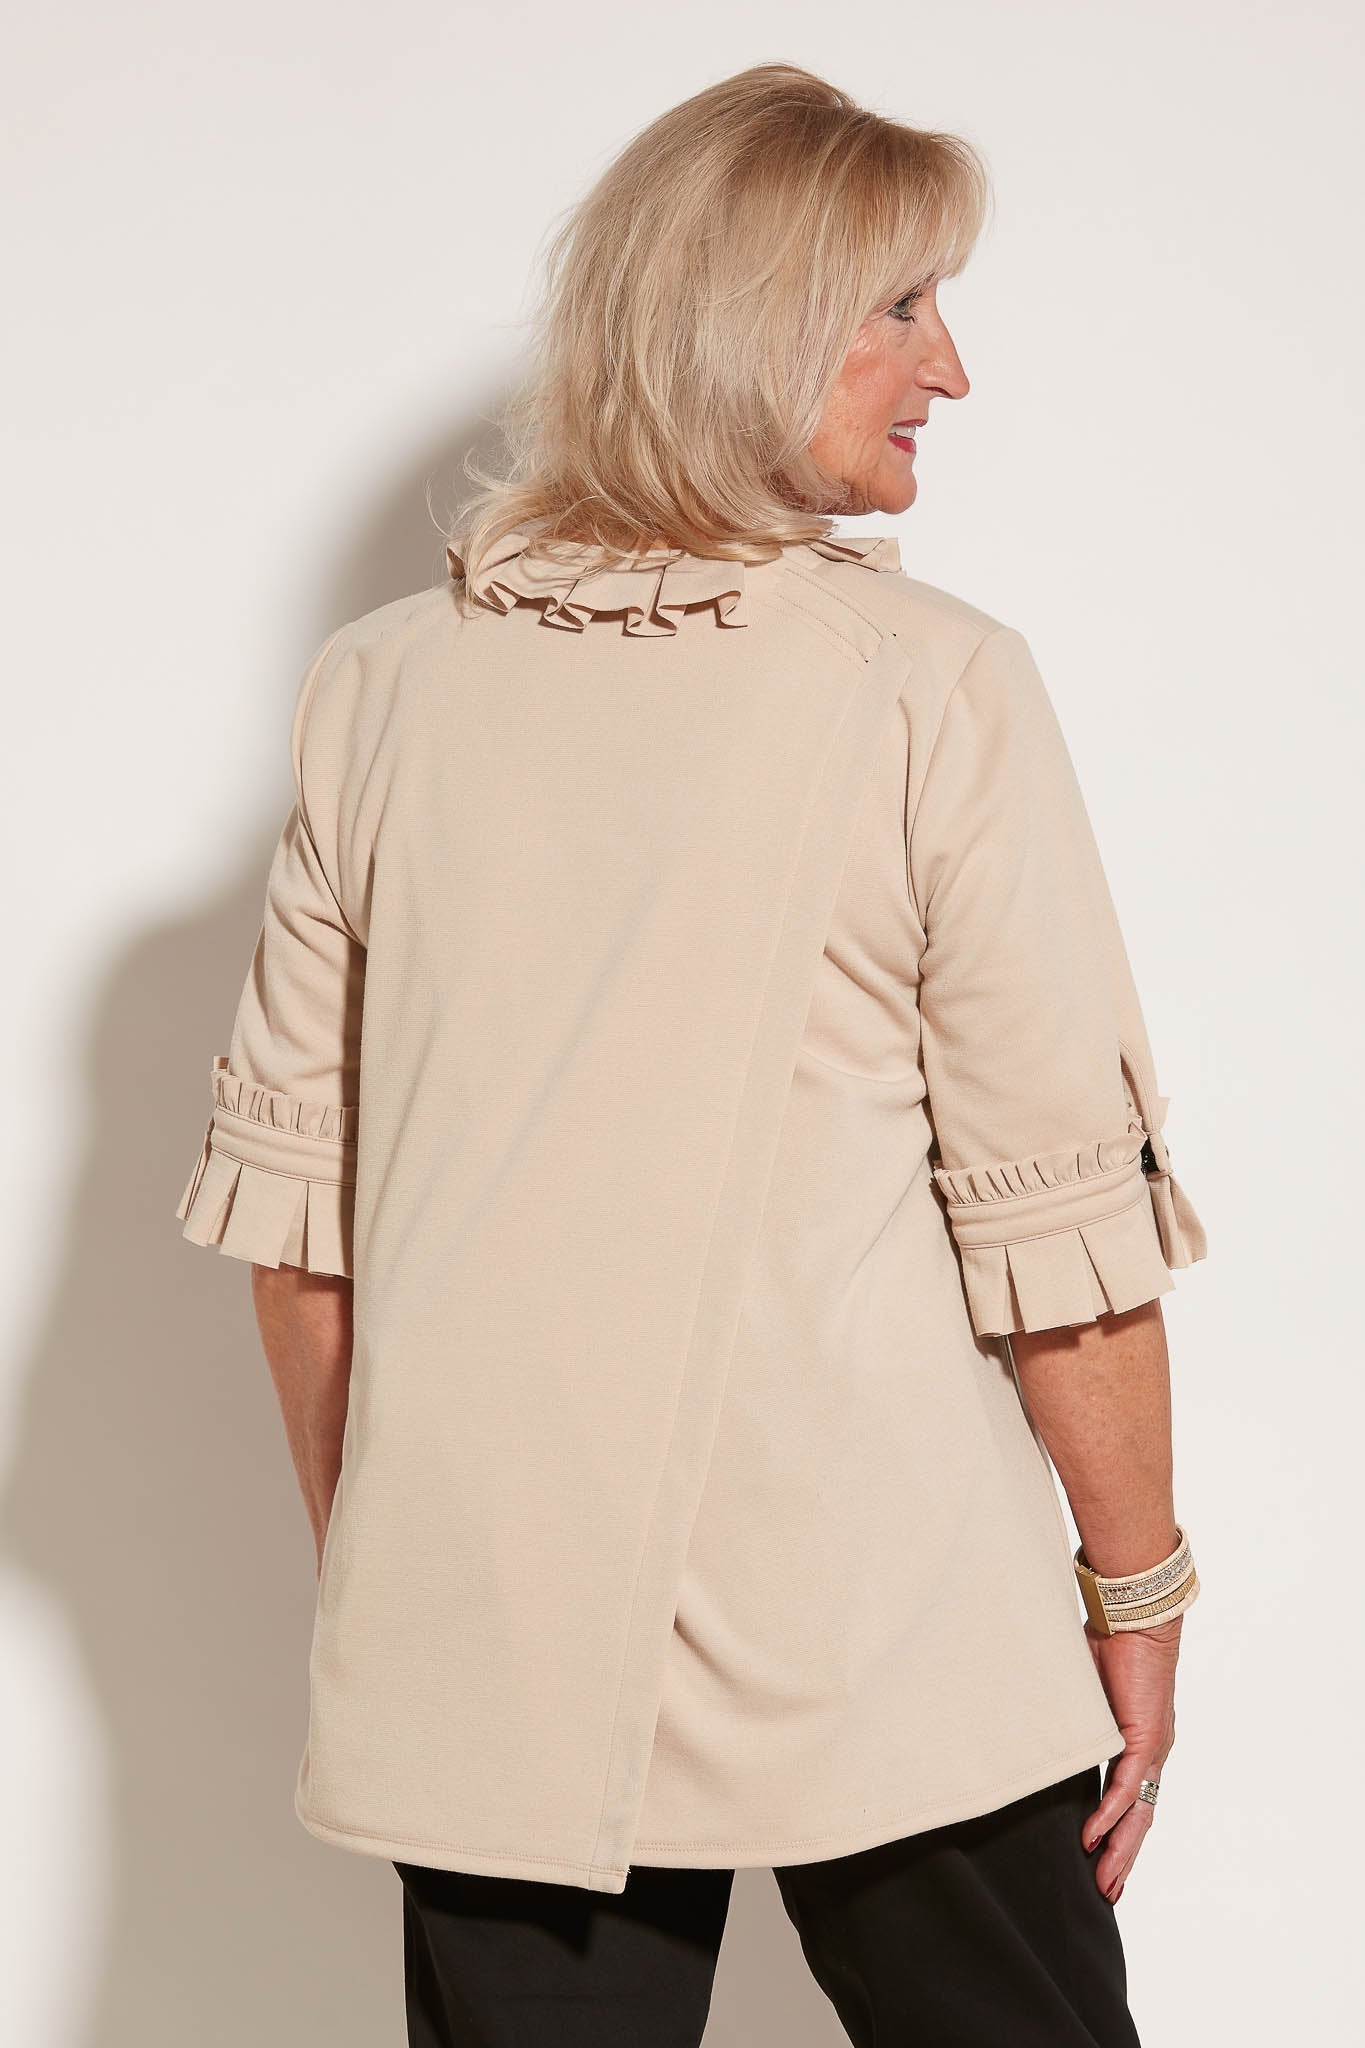 Senior Womens Assisted Dressing Top | Art in Aging